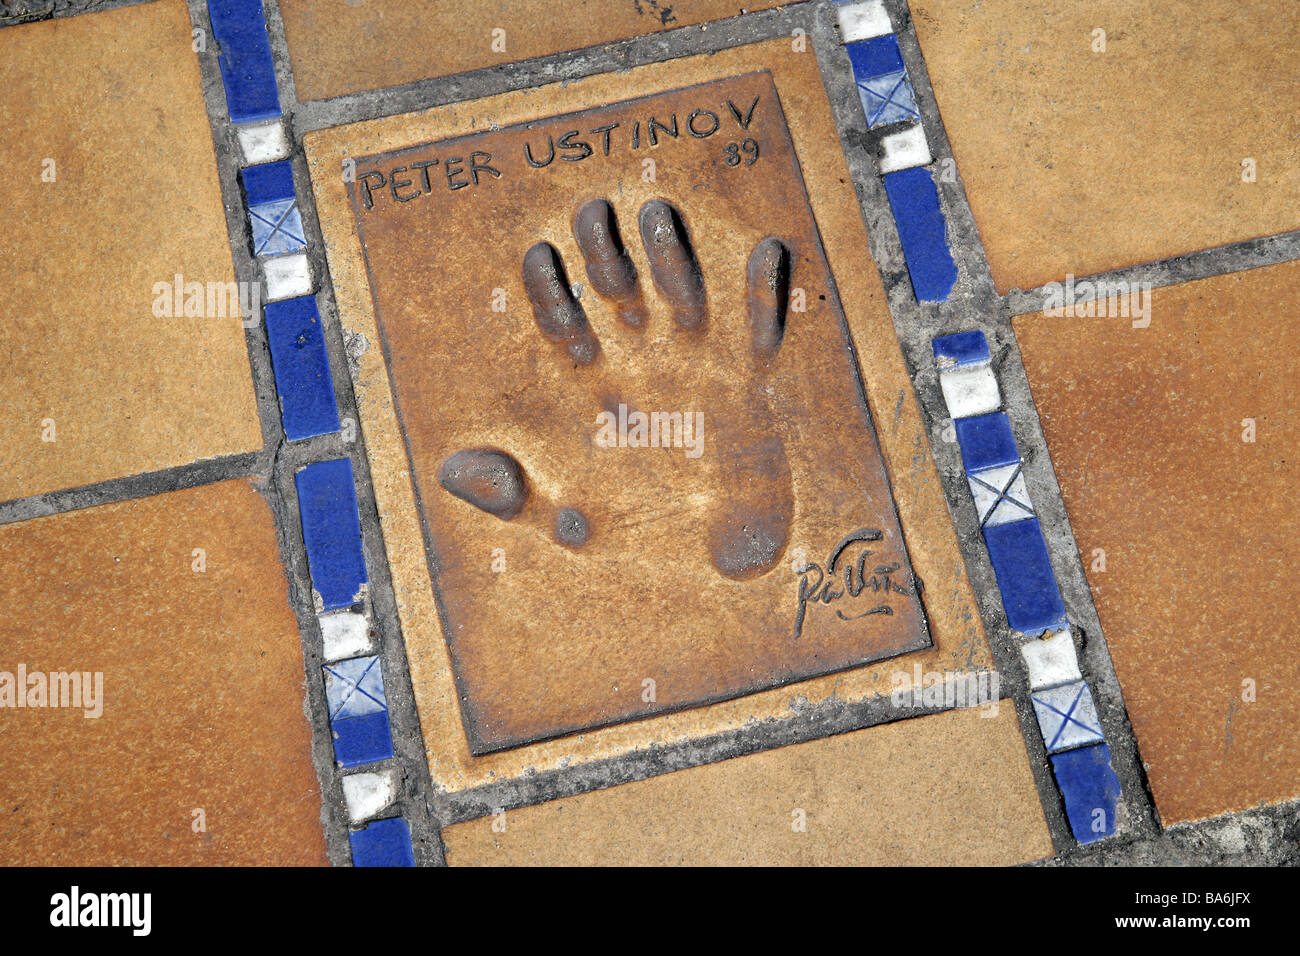 France Cote d'Azur Cannes palace of the festival hand-marks Peter Ustinov fire cannes cote d'azur film-festivals France French Stock Photo